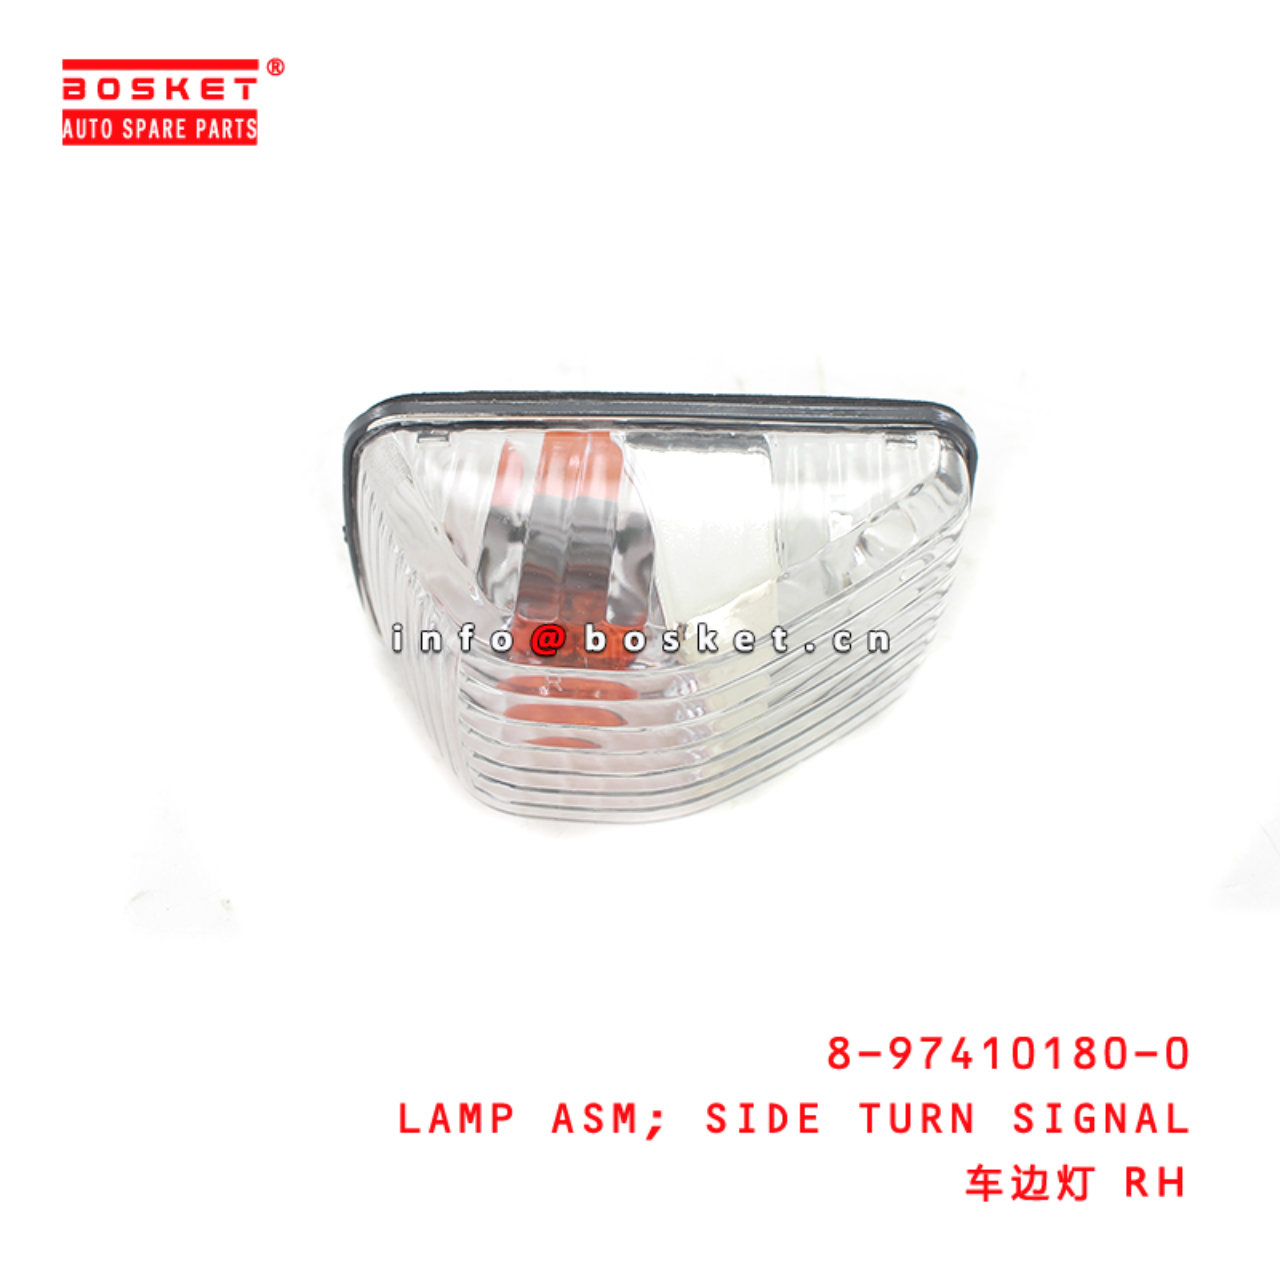 8-97410180-0 Side Turn Signal Lamp Assembly suitable for ISUZU 700P 8974101800